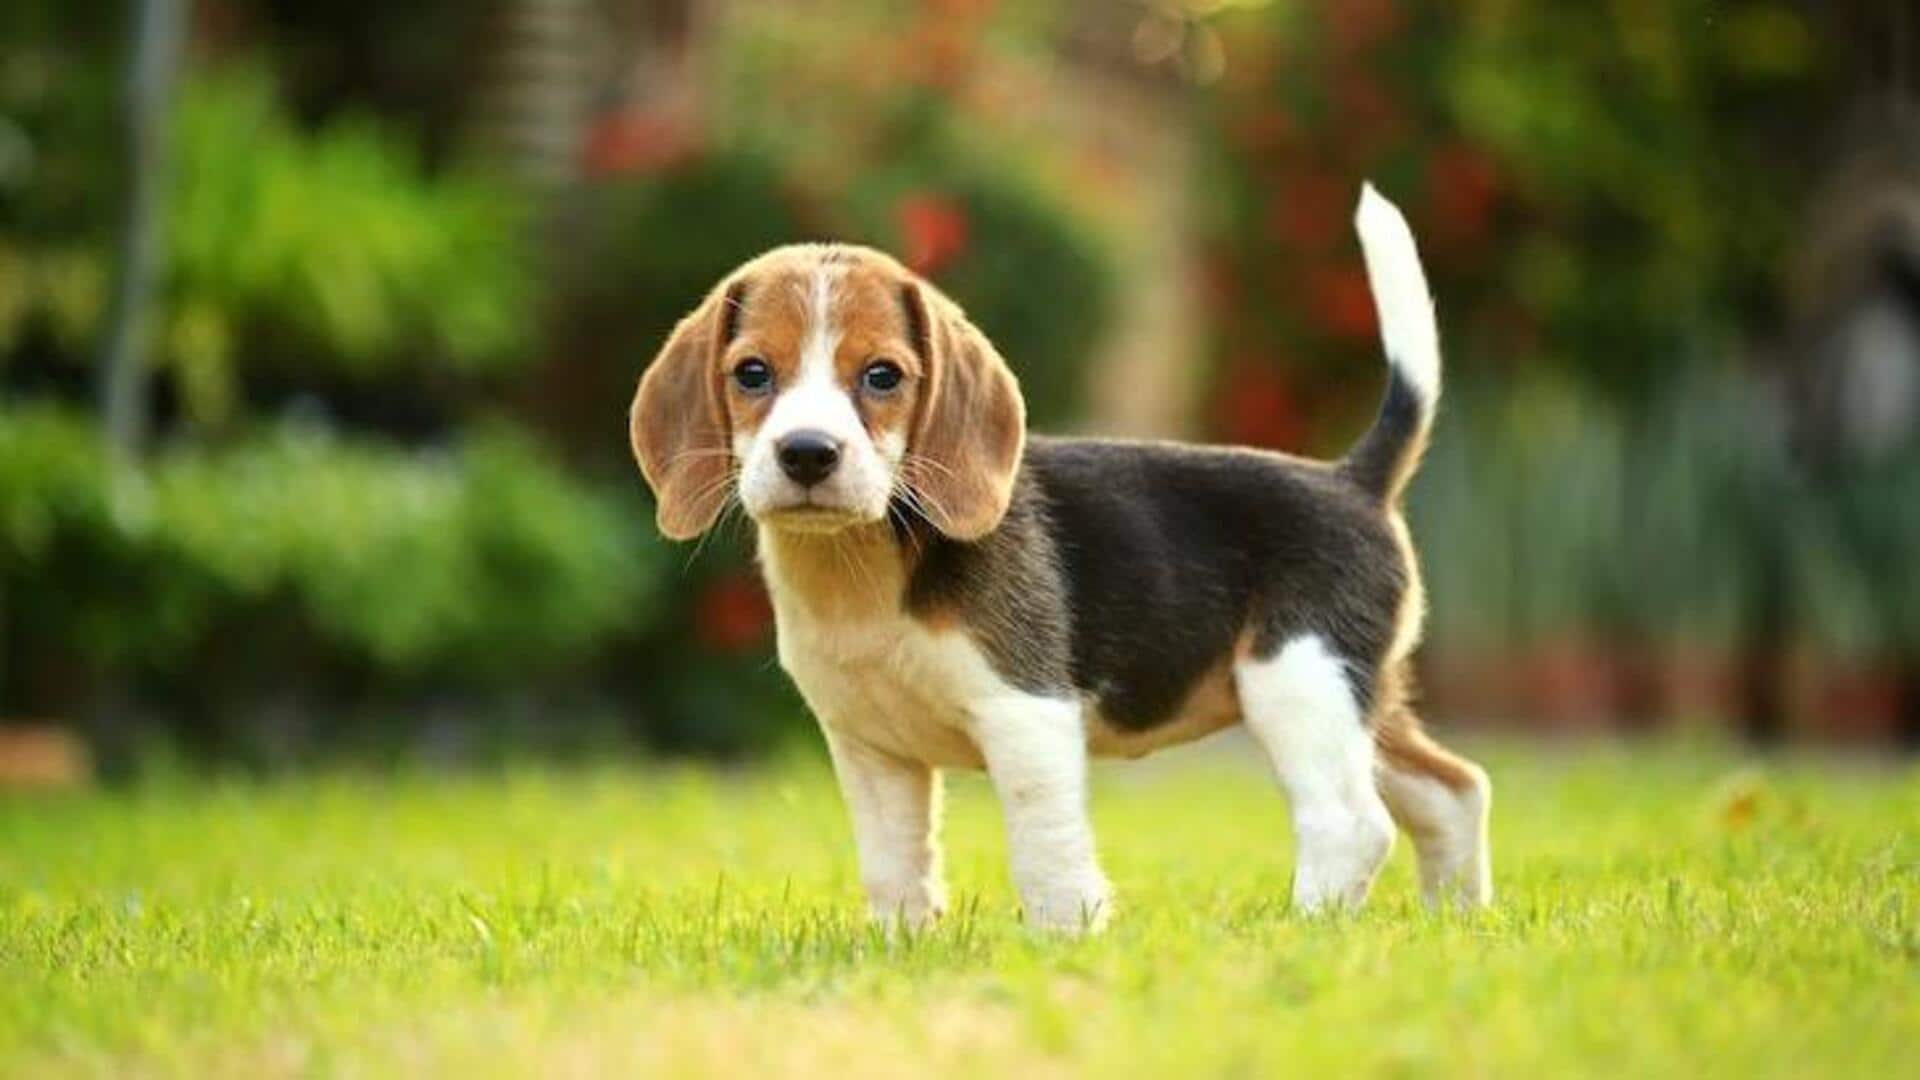 Take note of these Beagle puppy housebreaking tips